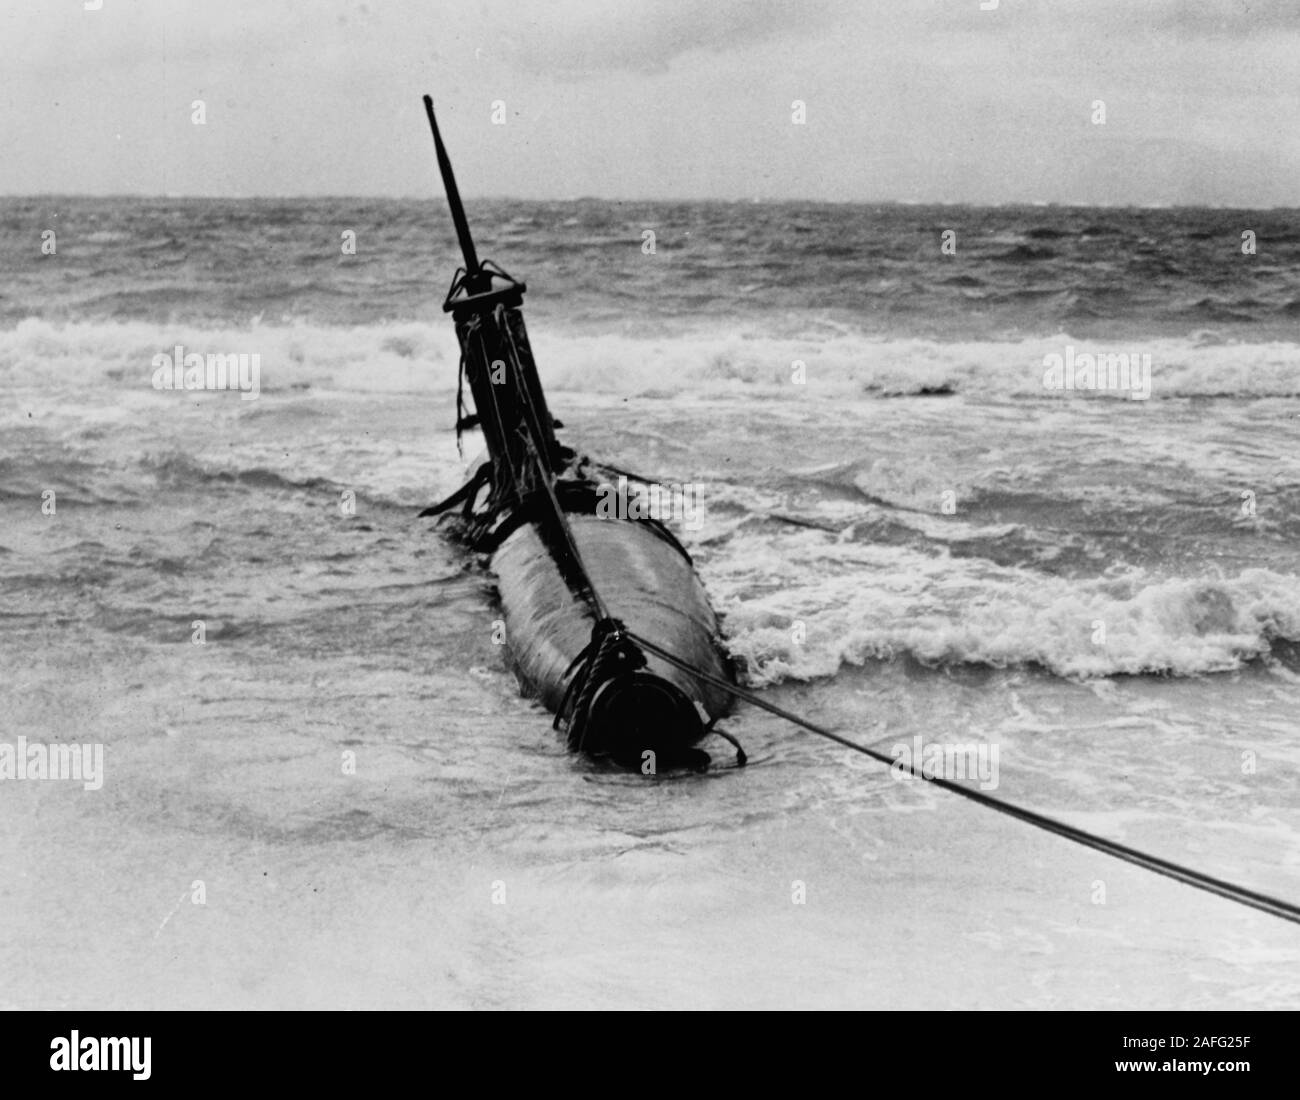 Japanese Type A midget submarine -  Beached in eastern Oahu after it grounded following attempts to enter Pearl Harbor during the 7 December 1941 Japanese attack. The photograph was taken on or shortly after 8 December 1941.  Copied in 1980 from Commander Submarine Squadron Four report, Serial 0570, of 26 December 1941. Stock Photo